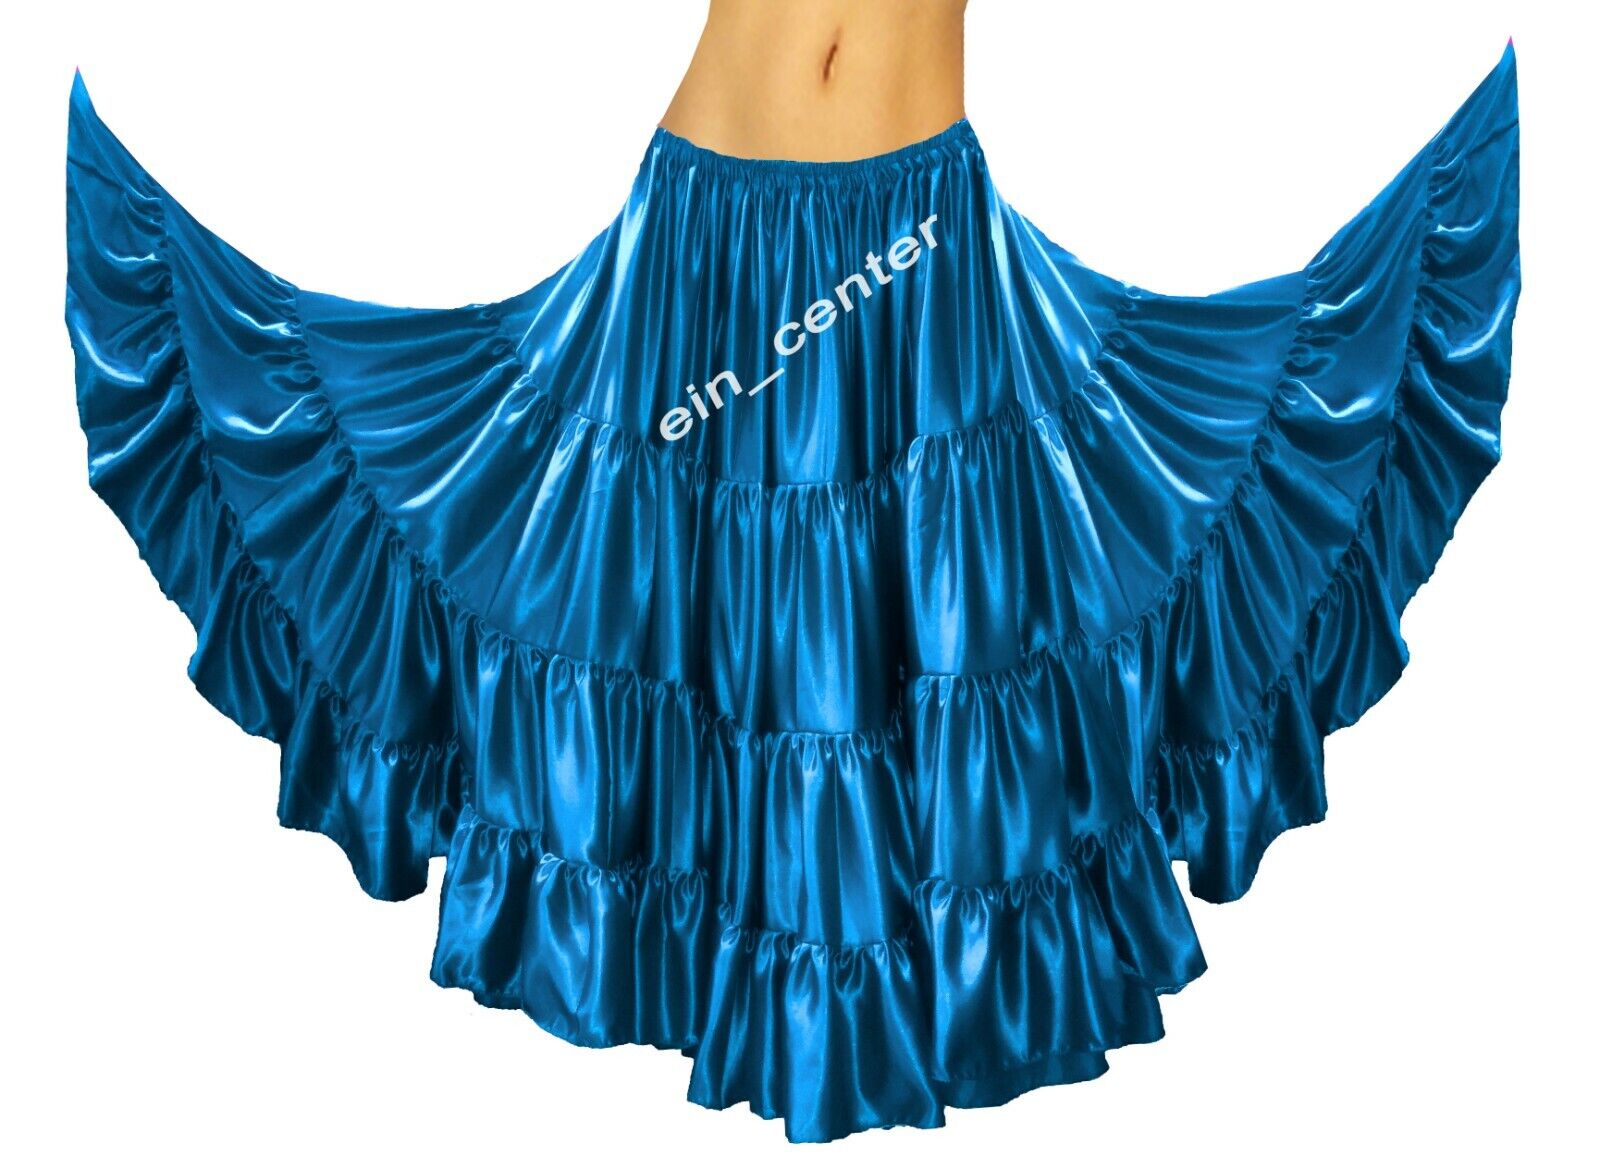 4 Layer Skirt Belly Dance Wear 25 Yard Tier Teal Manufacturer regenerated product Satin Color 25% OFF T